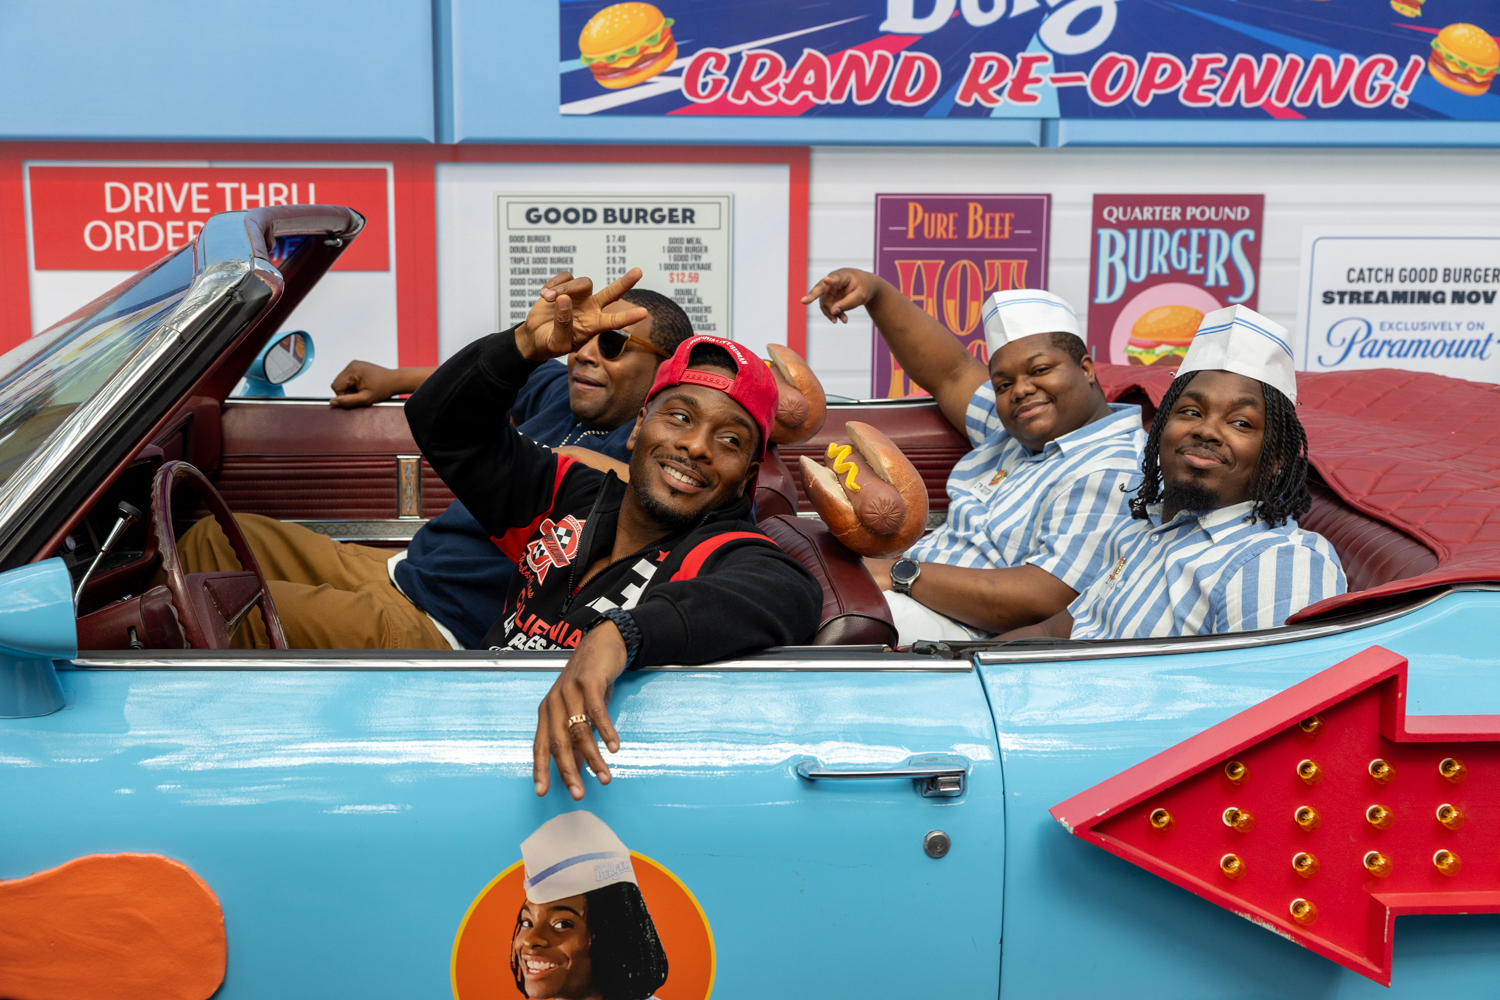 Four people sit in a blueand red convertible dressed as characters from the television show “Good Burger”. Behind them is a wall painted to look like a fast food drive-thru window complete with “Good Burger” posters.